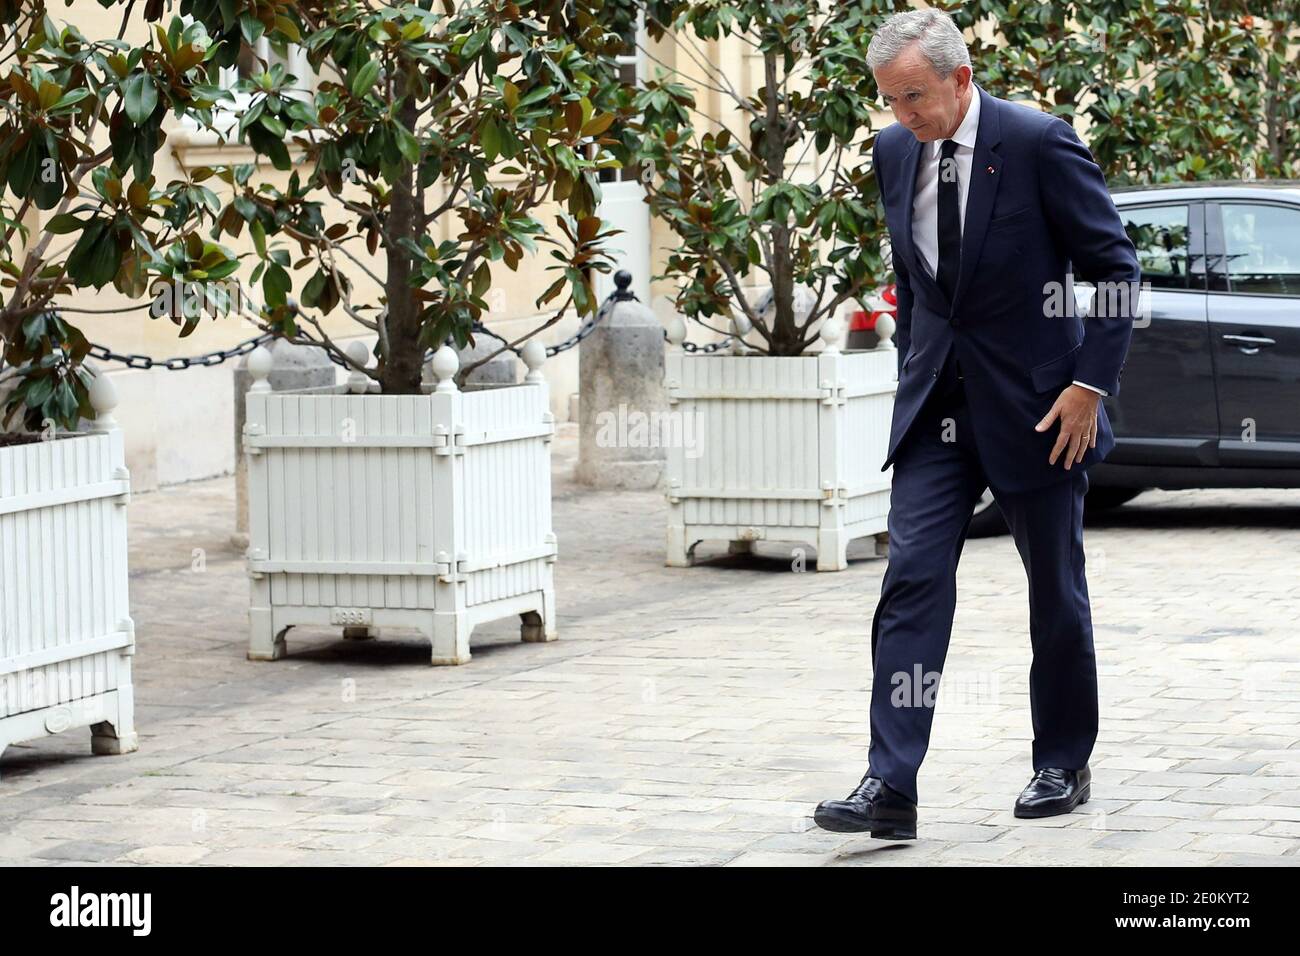 Paris, France. 21st Jan, 2017. (from LtoR) CEO Dior, Sidney Toledano, Owner  of LVMH Luxury Group Bernard Arnault are seen arriving at Dior Fashion Show  during Paris Fashion Week Credit: Gaetano Piazzolla/Pacific